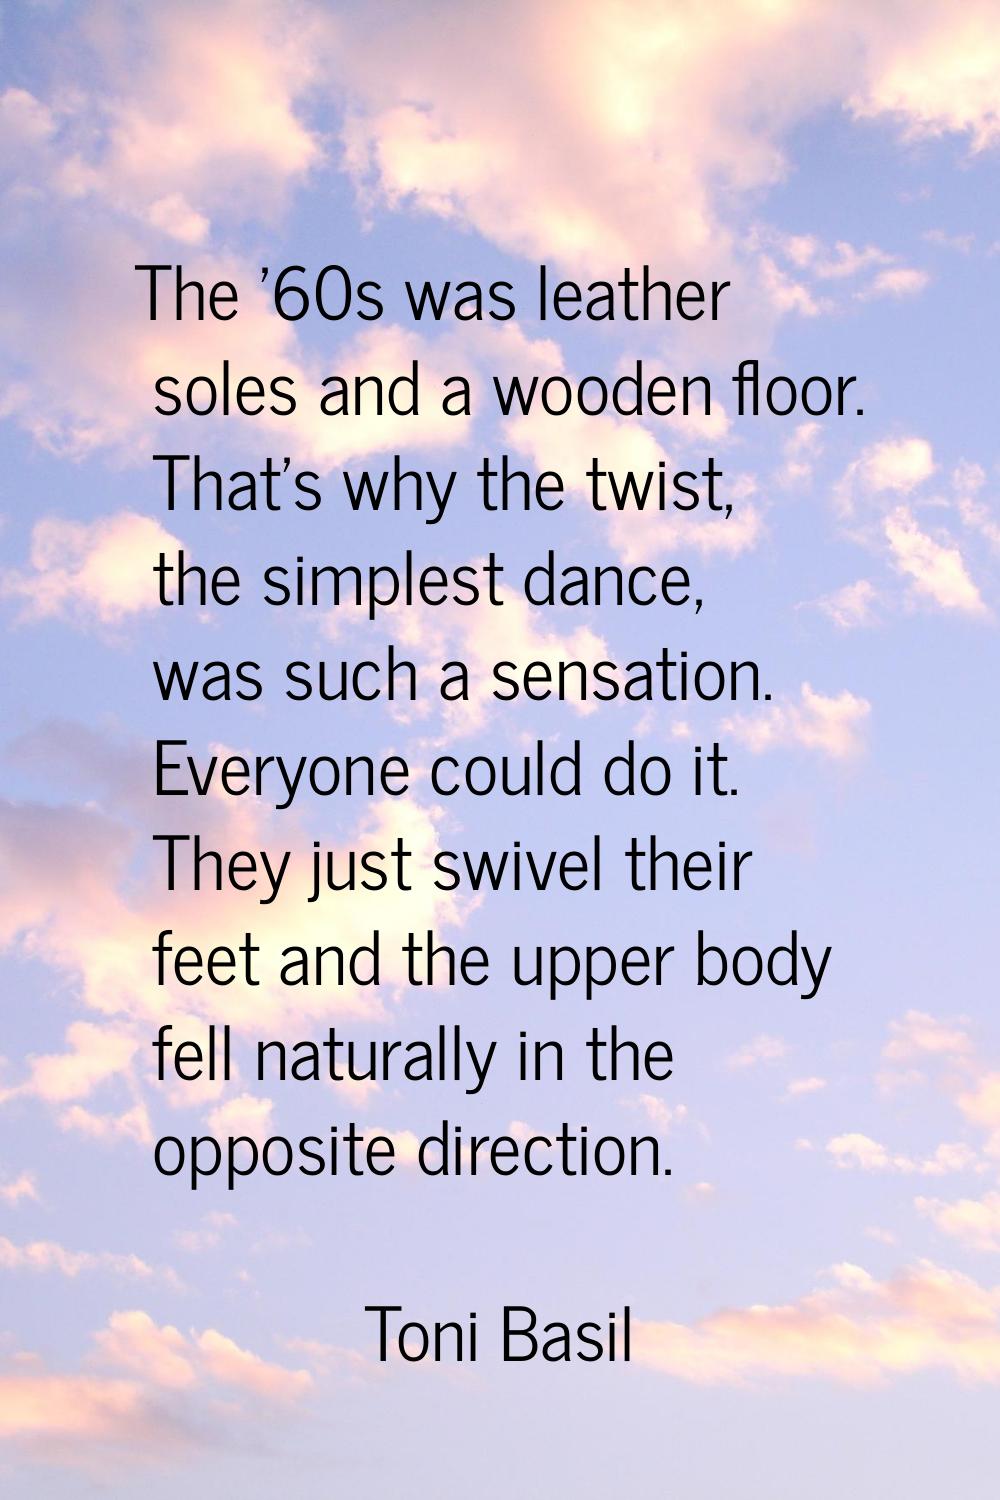 The '60s was leather soles and a wooden floor. That's why the twist, the simplest dance, was such a